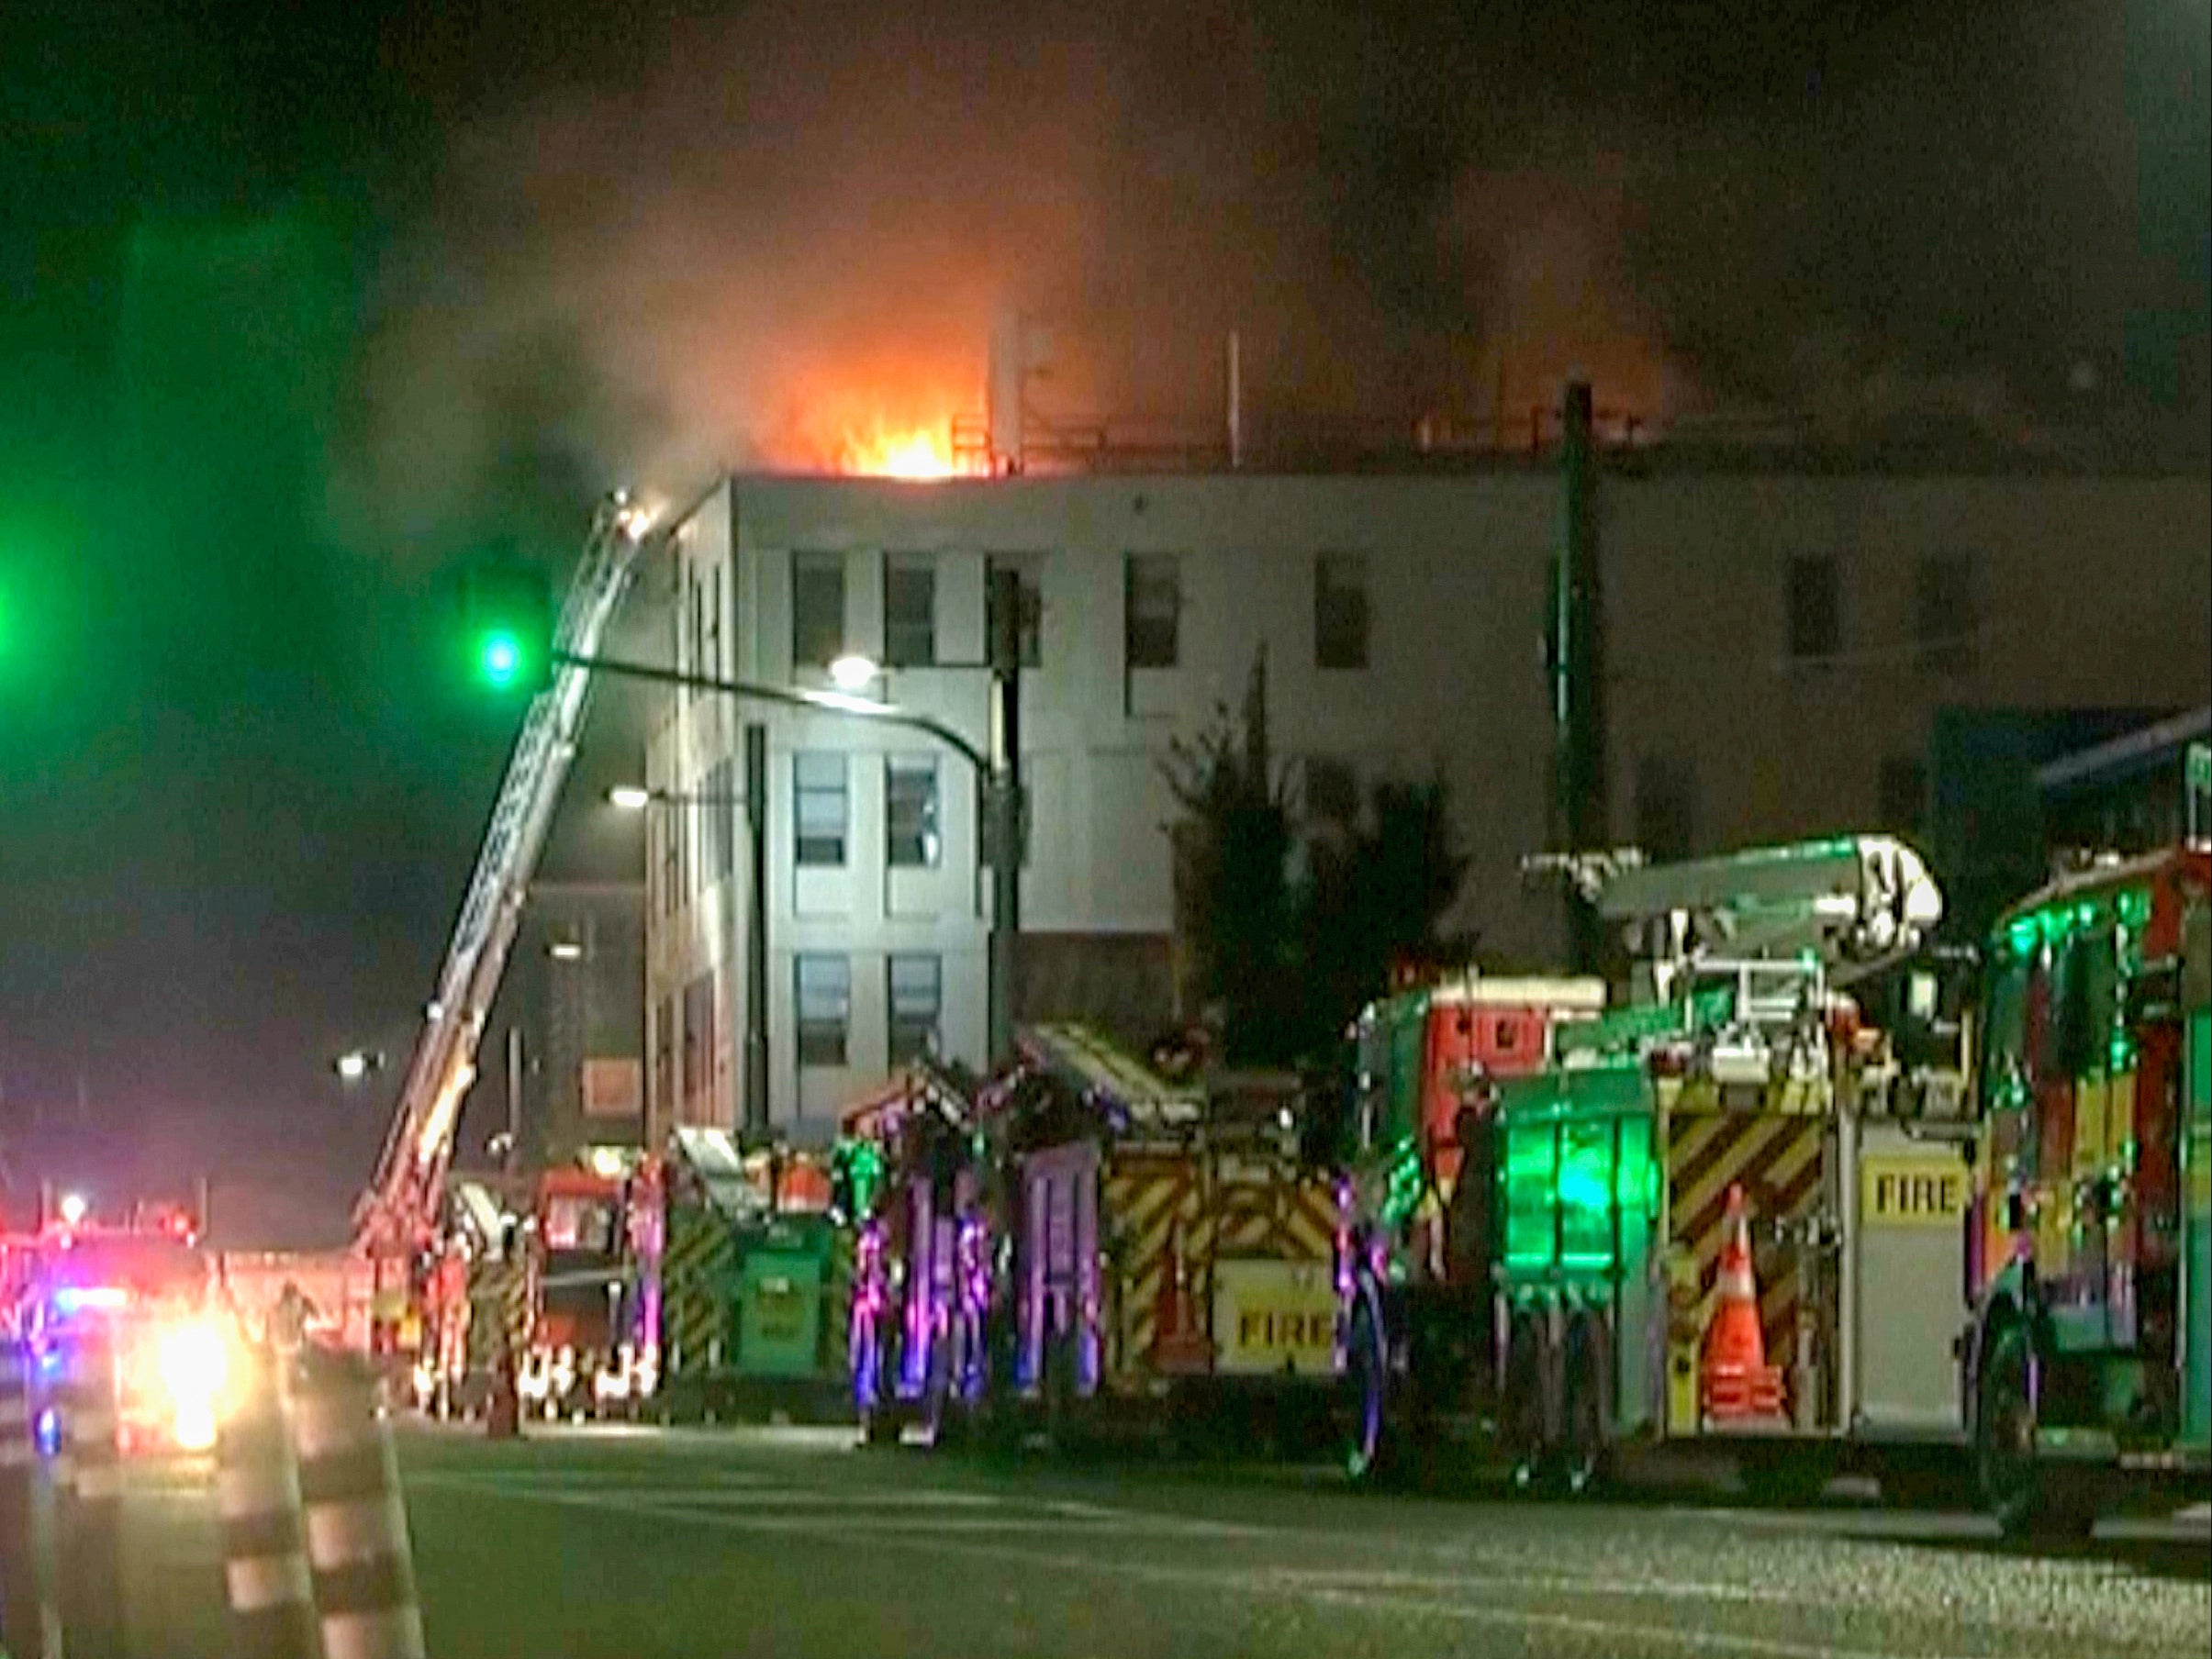 Wellington hostel fire – latest news: At least six killed and others missing after blaze in four-storey hostel in New Zealand